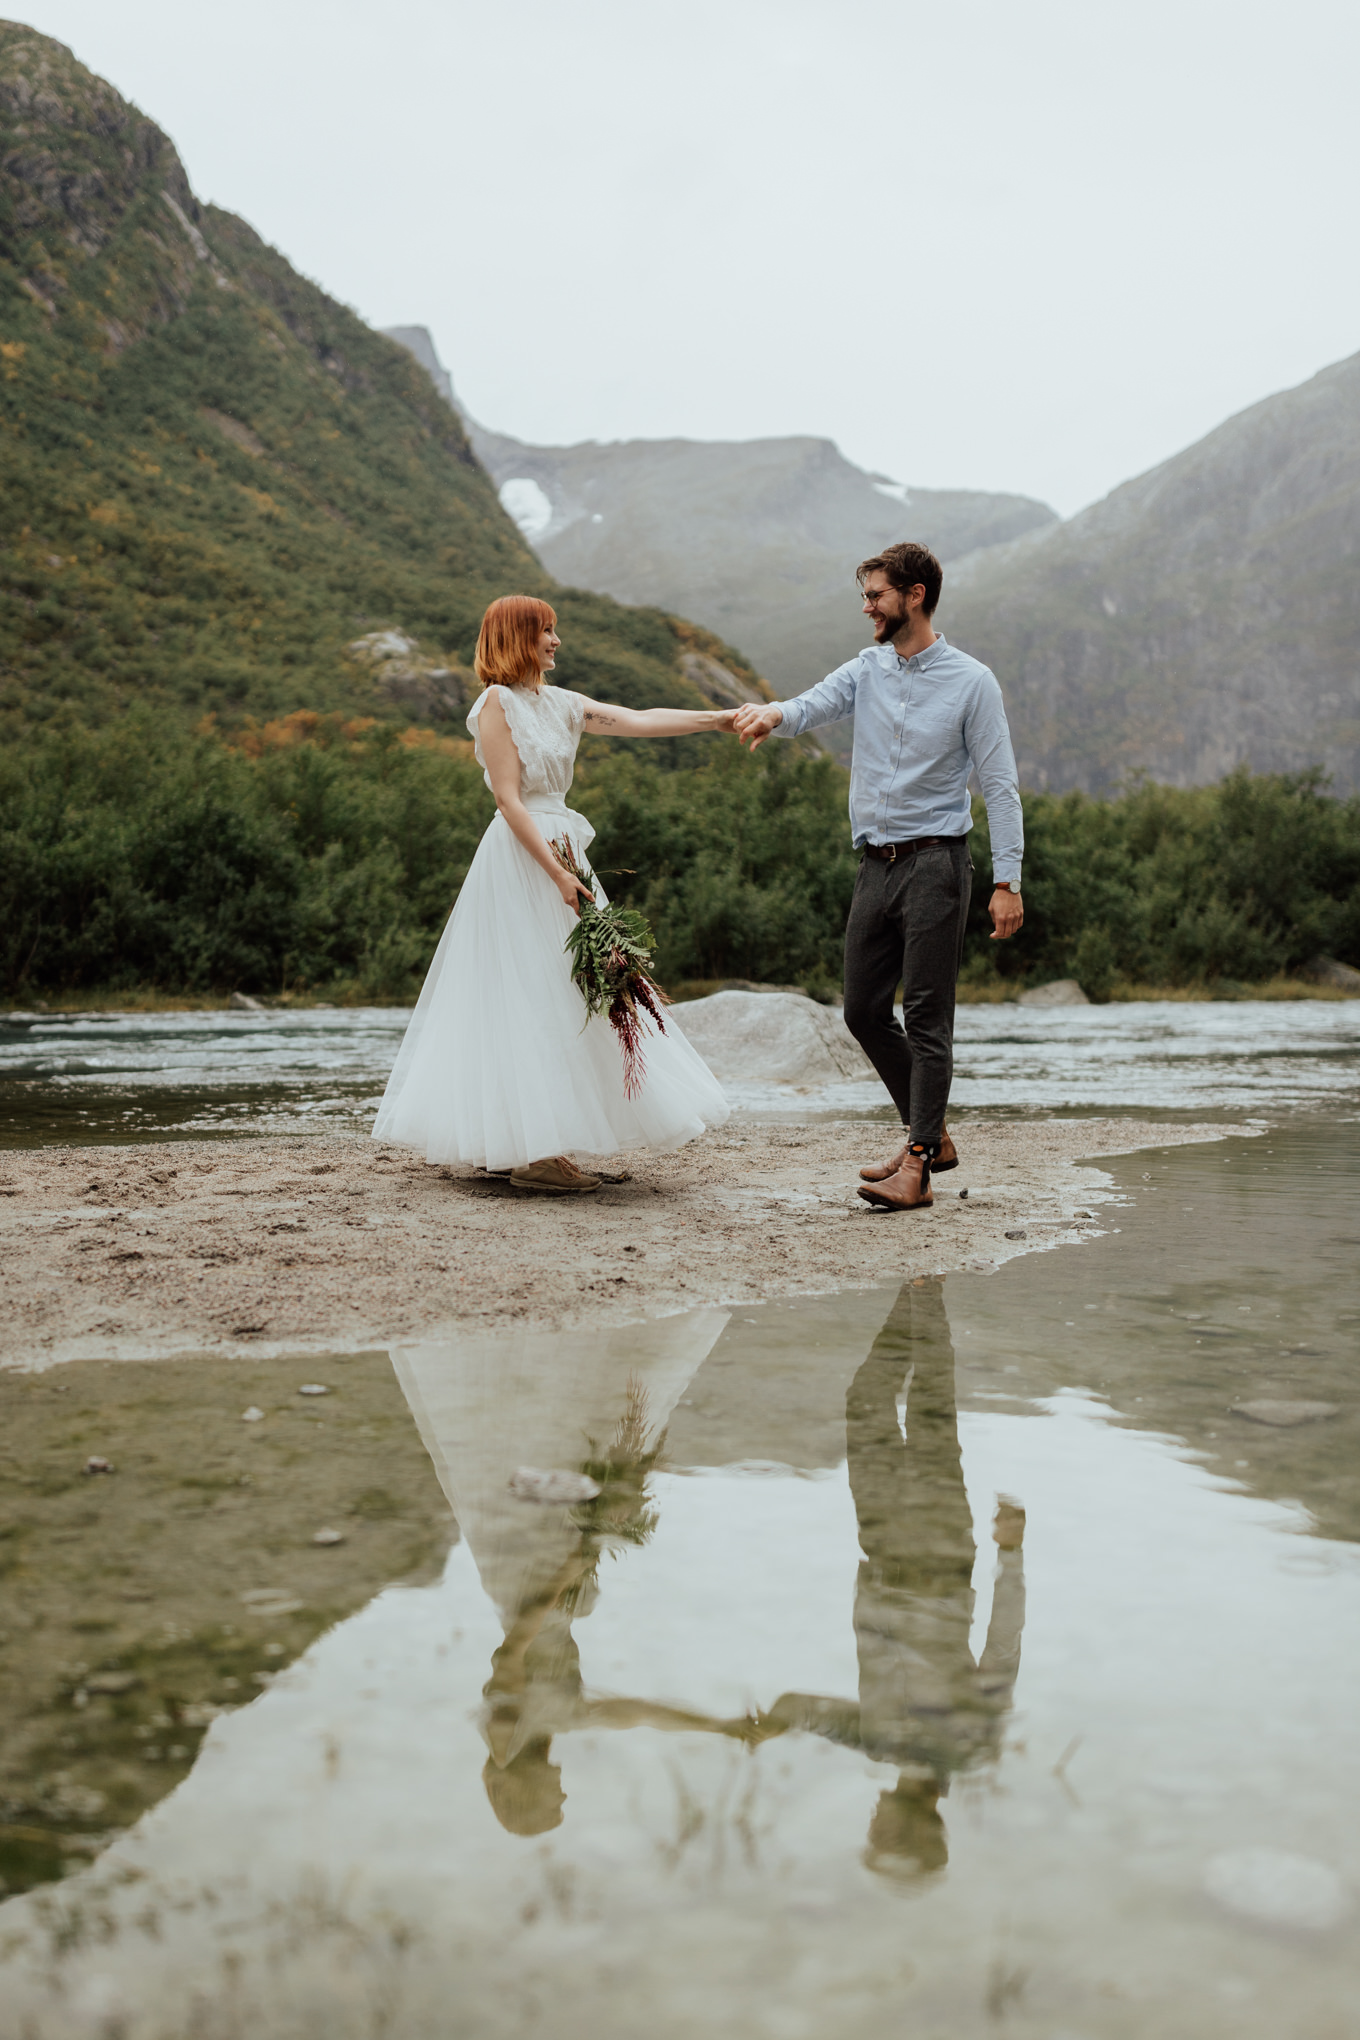 A couple eloping in Norway dance under cloudy skies